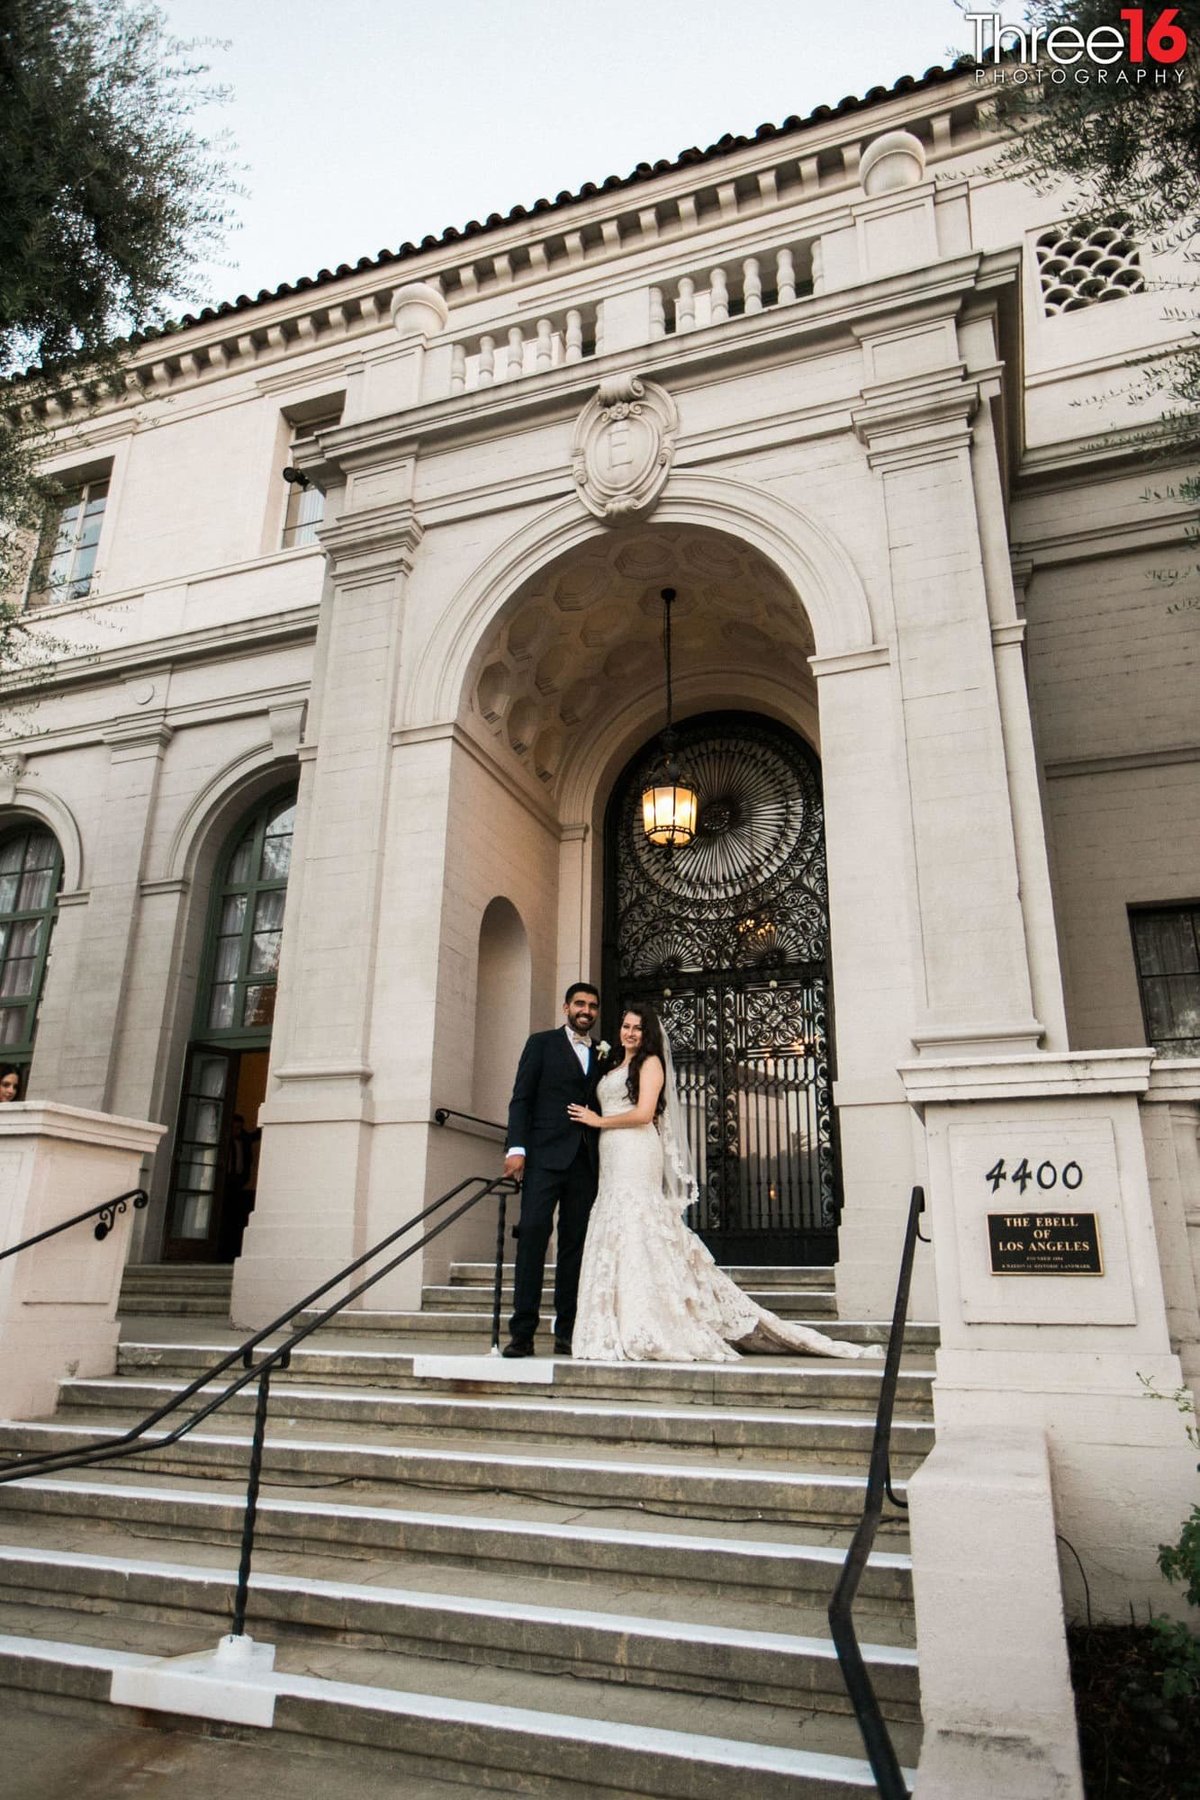 Bride and Groom pose for photos at the entrance to the Ebell LA